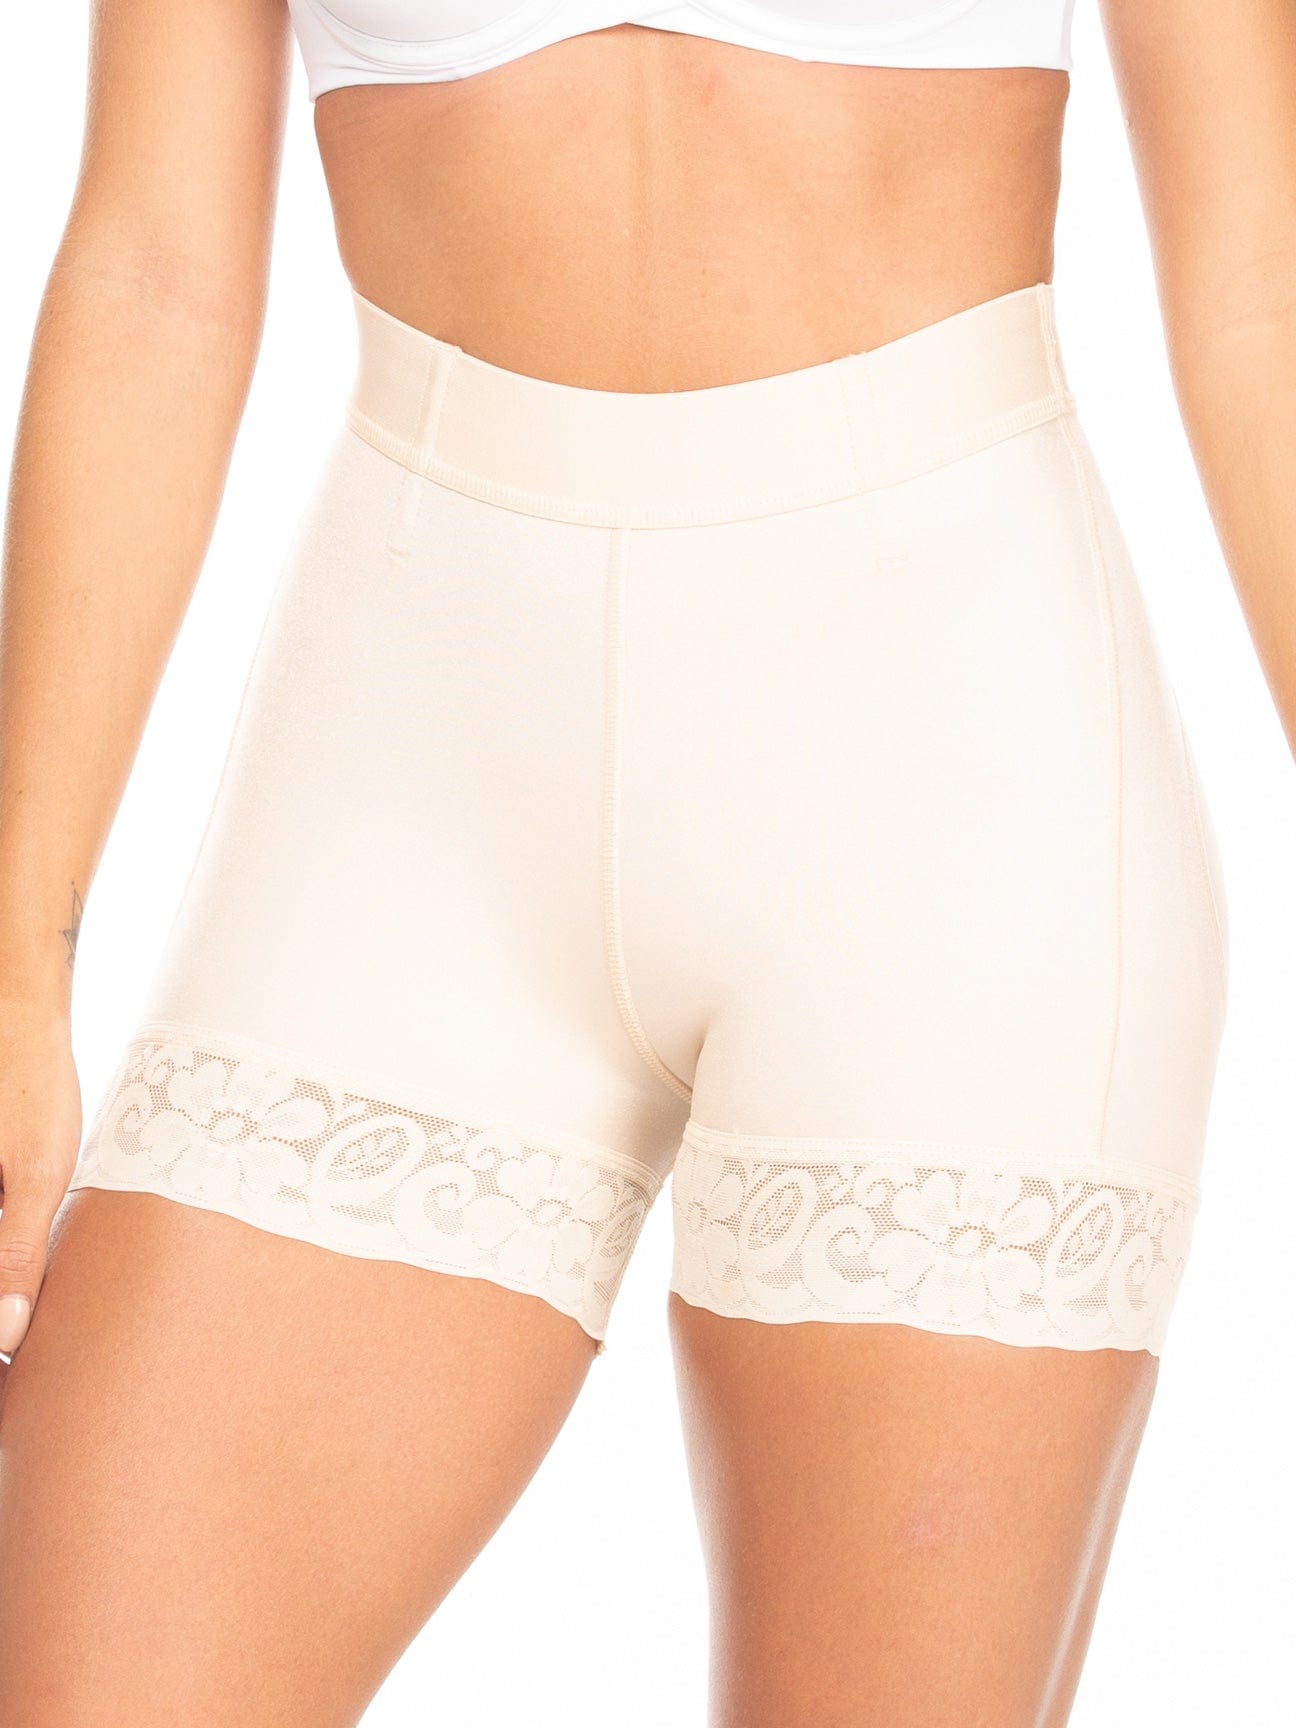 Lower front view of the white high waist booty lifter.